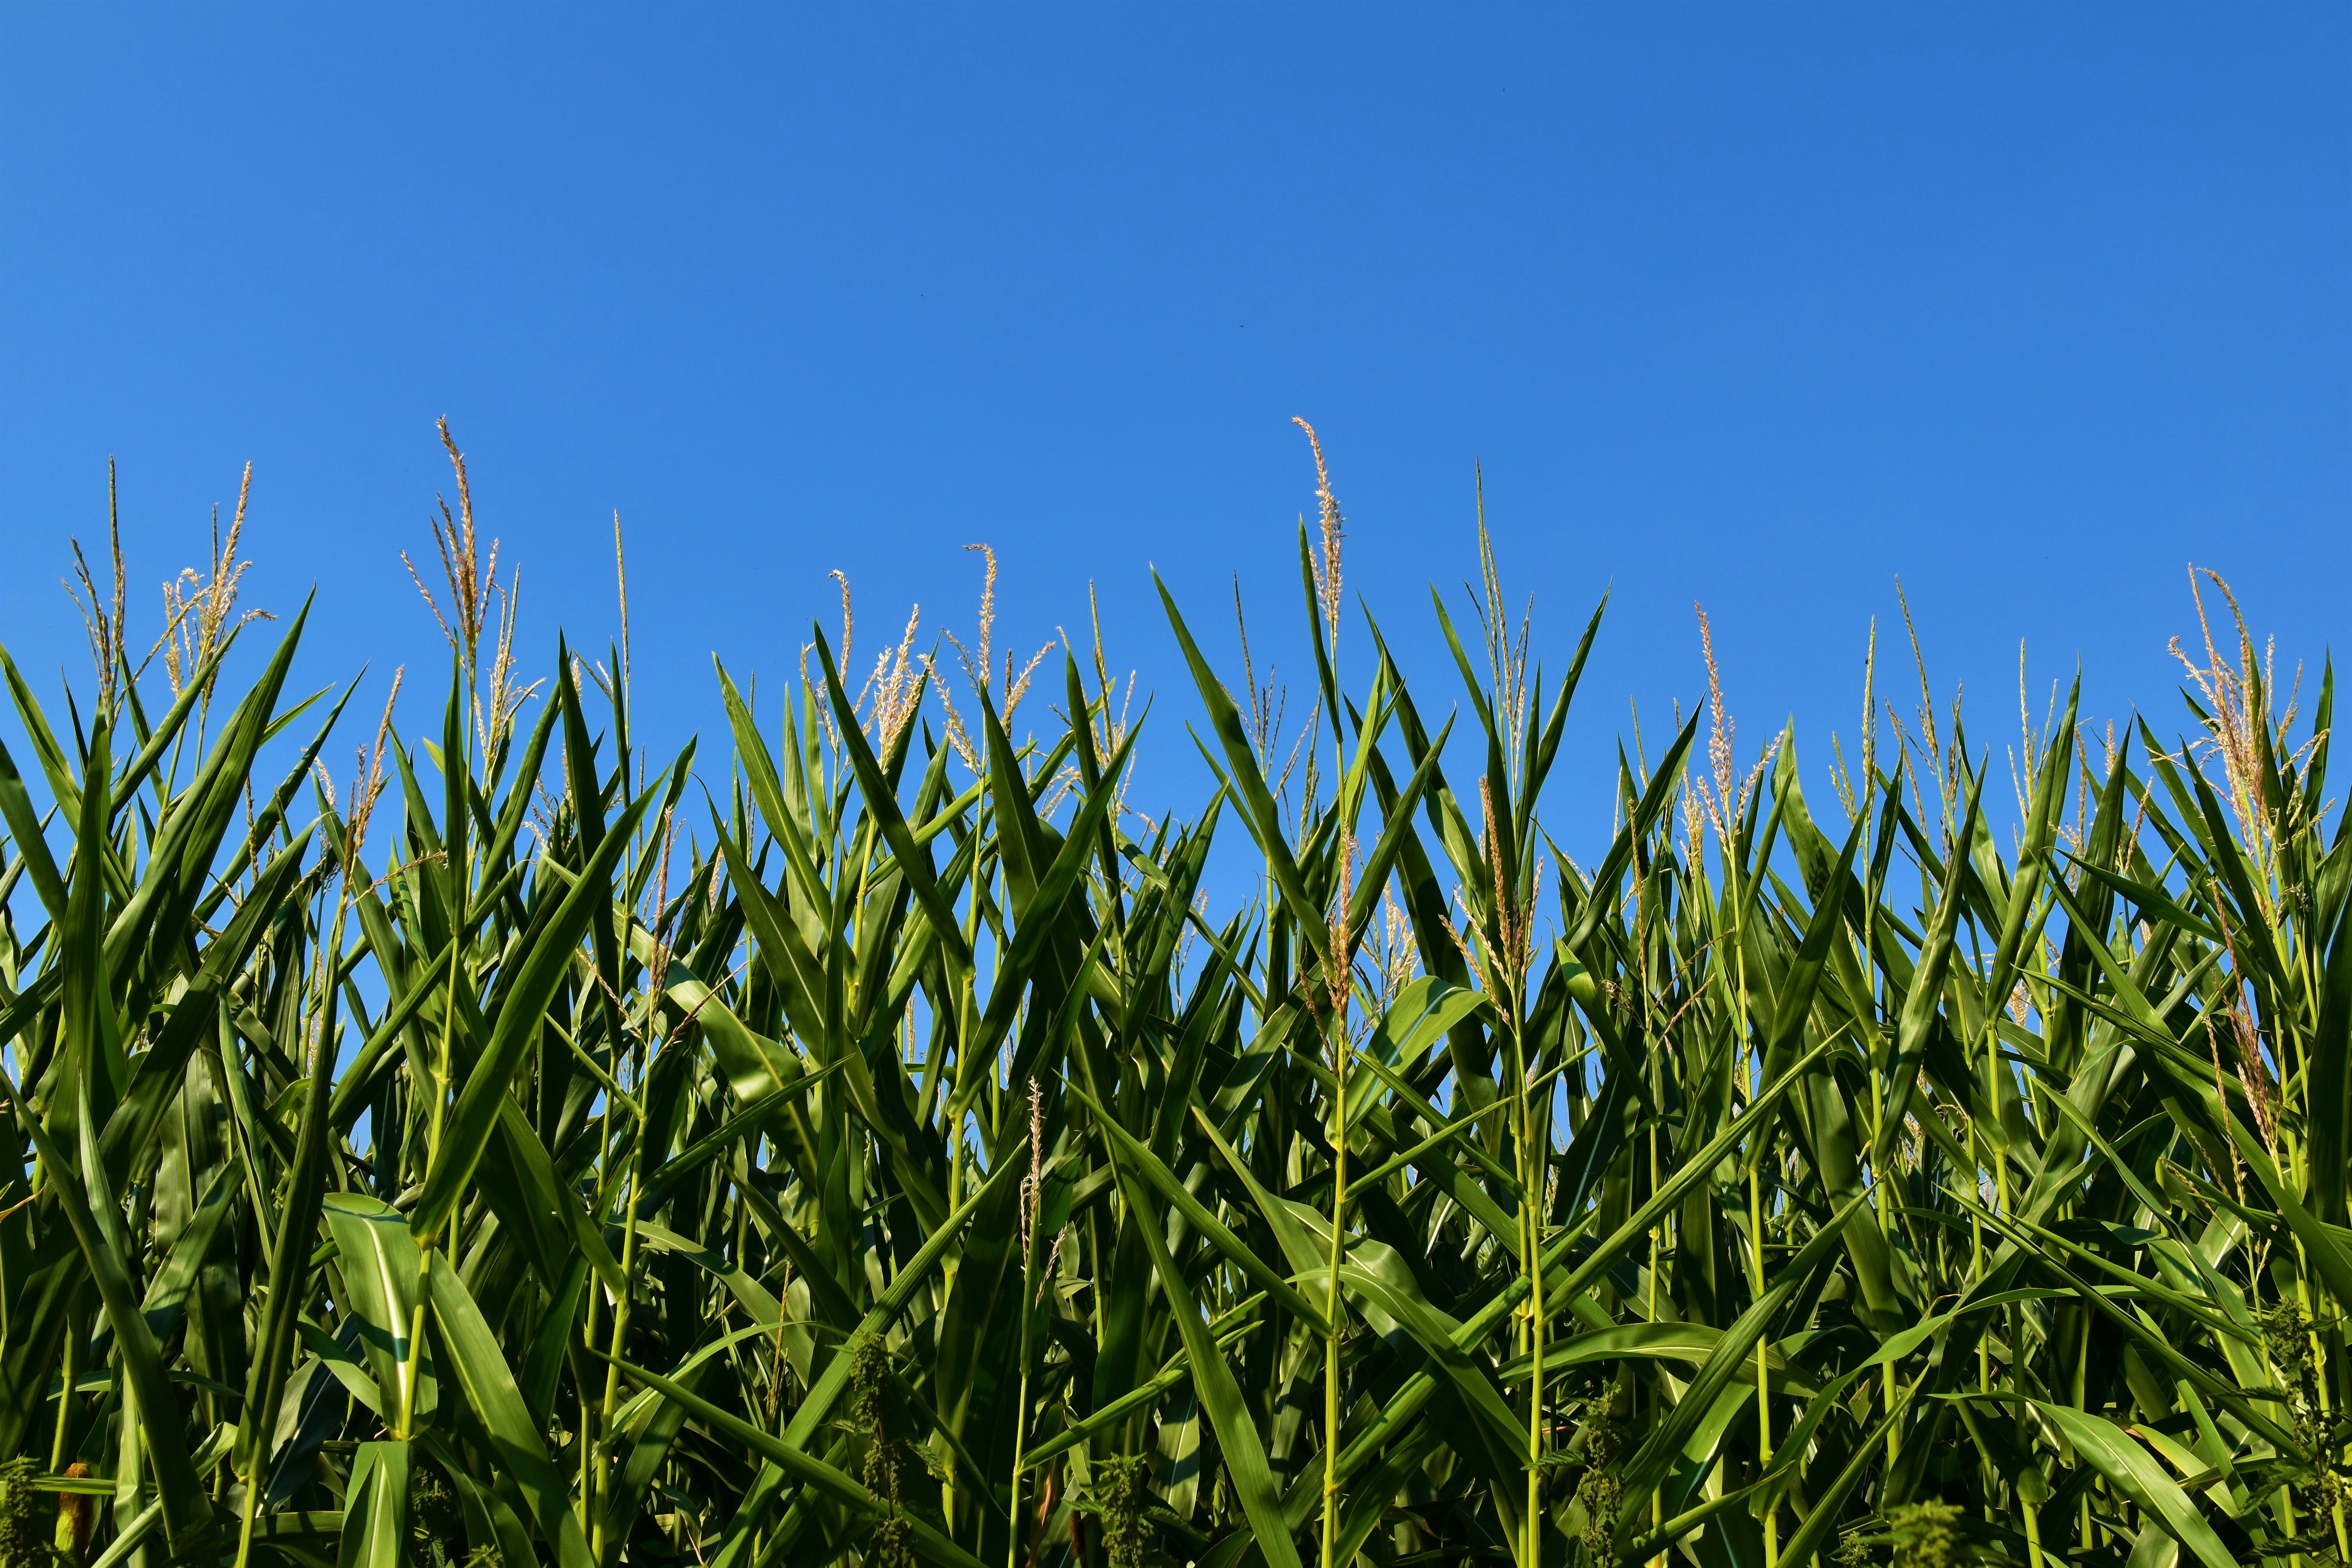 green wheat field under blue sky during daytime